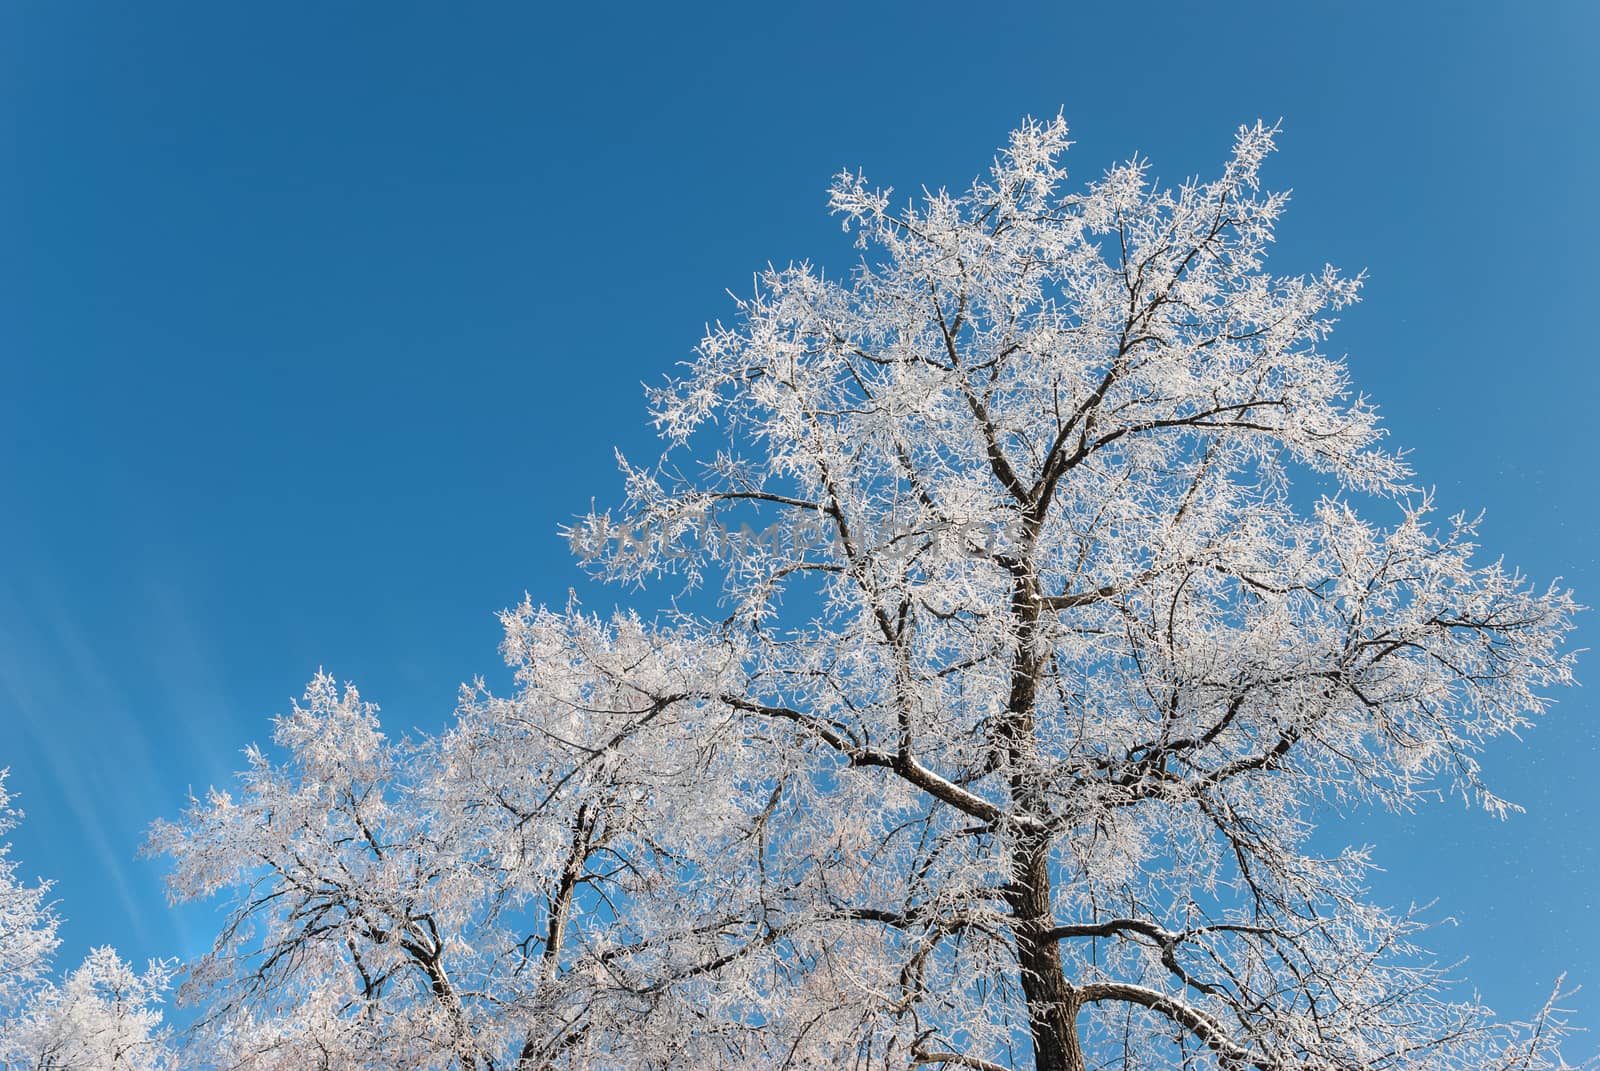 Winter trees covered with white frost, against the clear blue sky